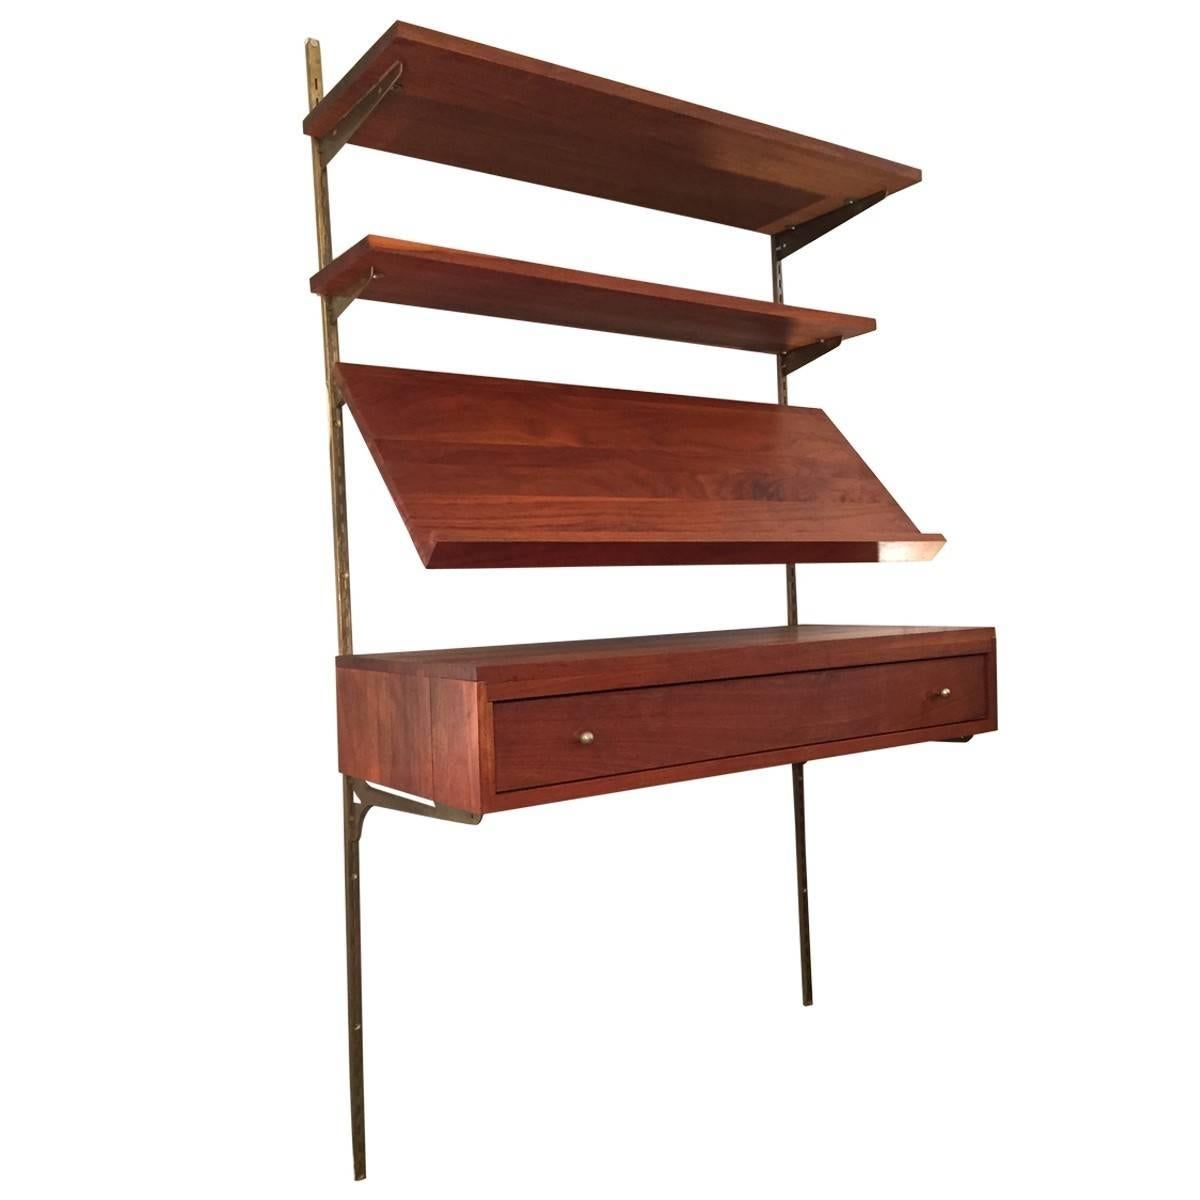 Mid-Century Modern Woodland Furniture was started in 1996 by Lynn and Pat Harker, in Idaho Falls to serve the interior design community with high-quality products. This unique adjustable wall unit deconstructs the traditional elements of a classic